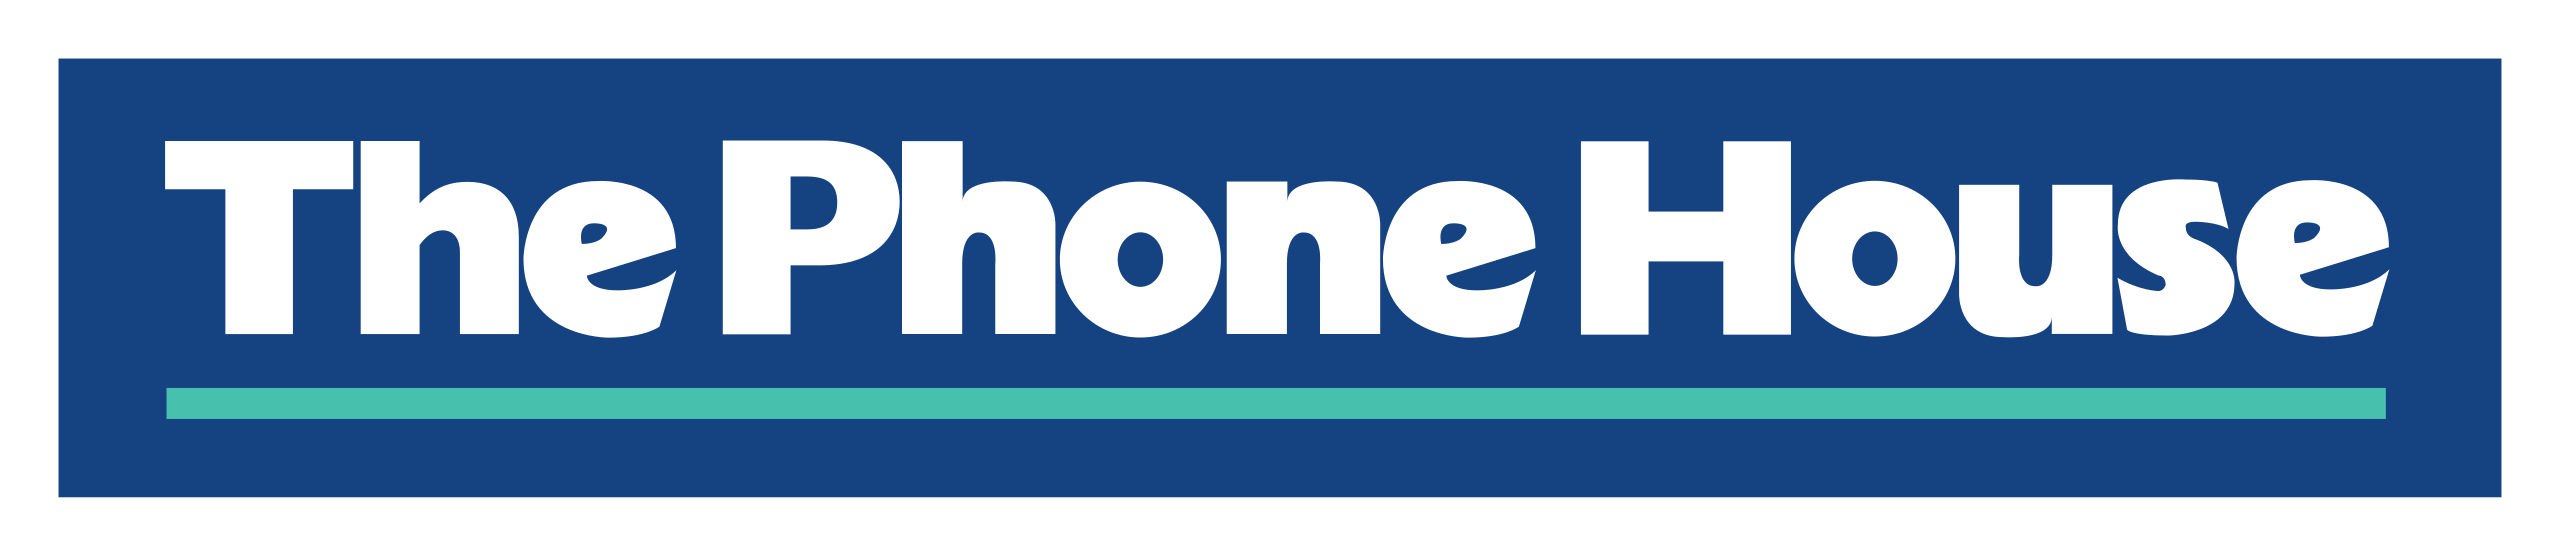 The phonehouse logotyp